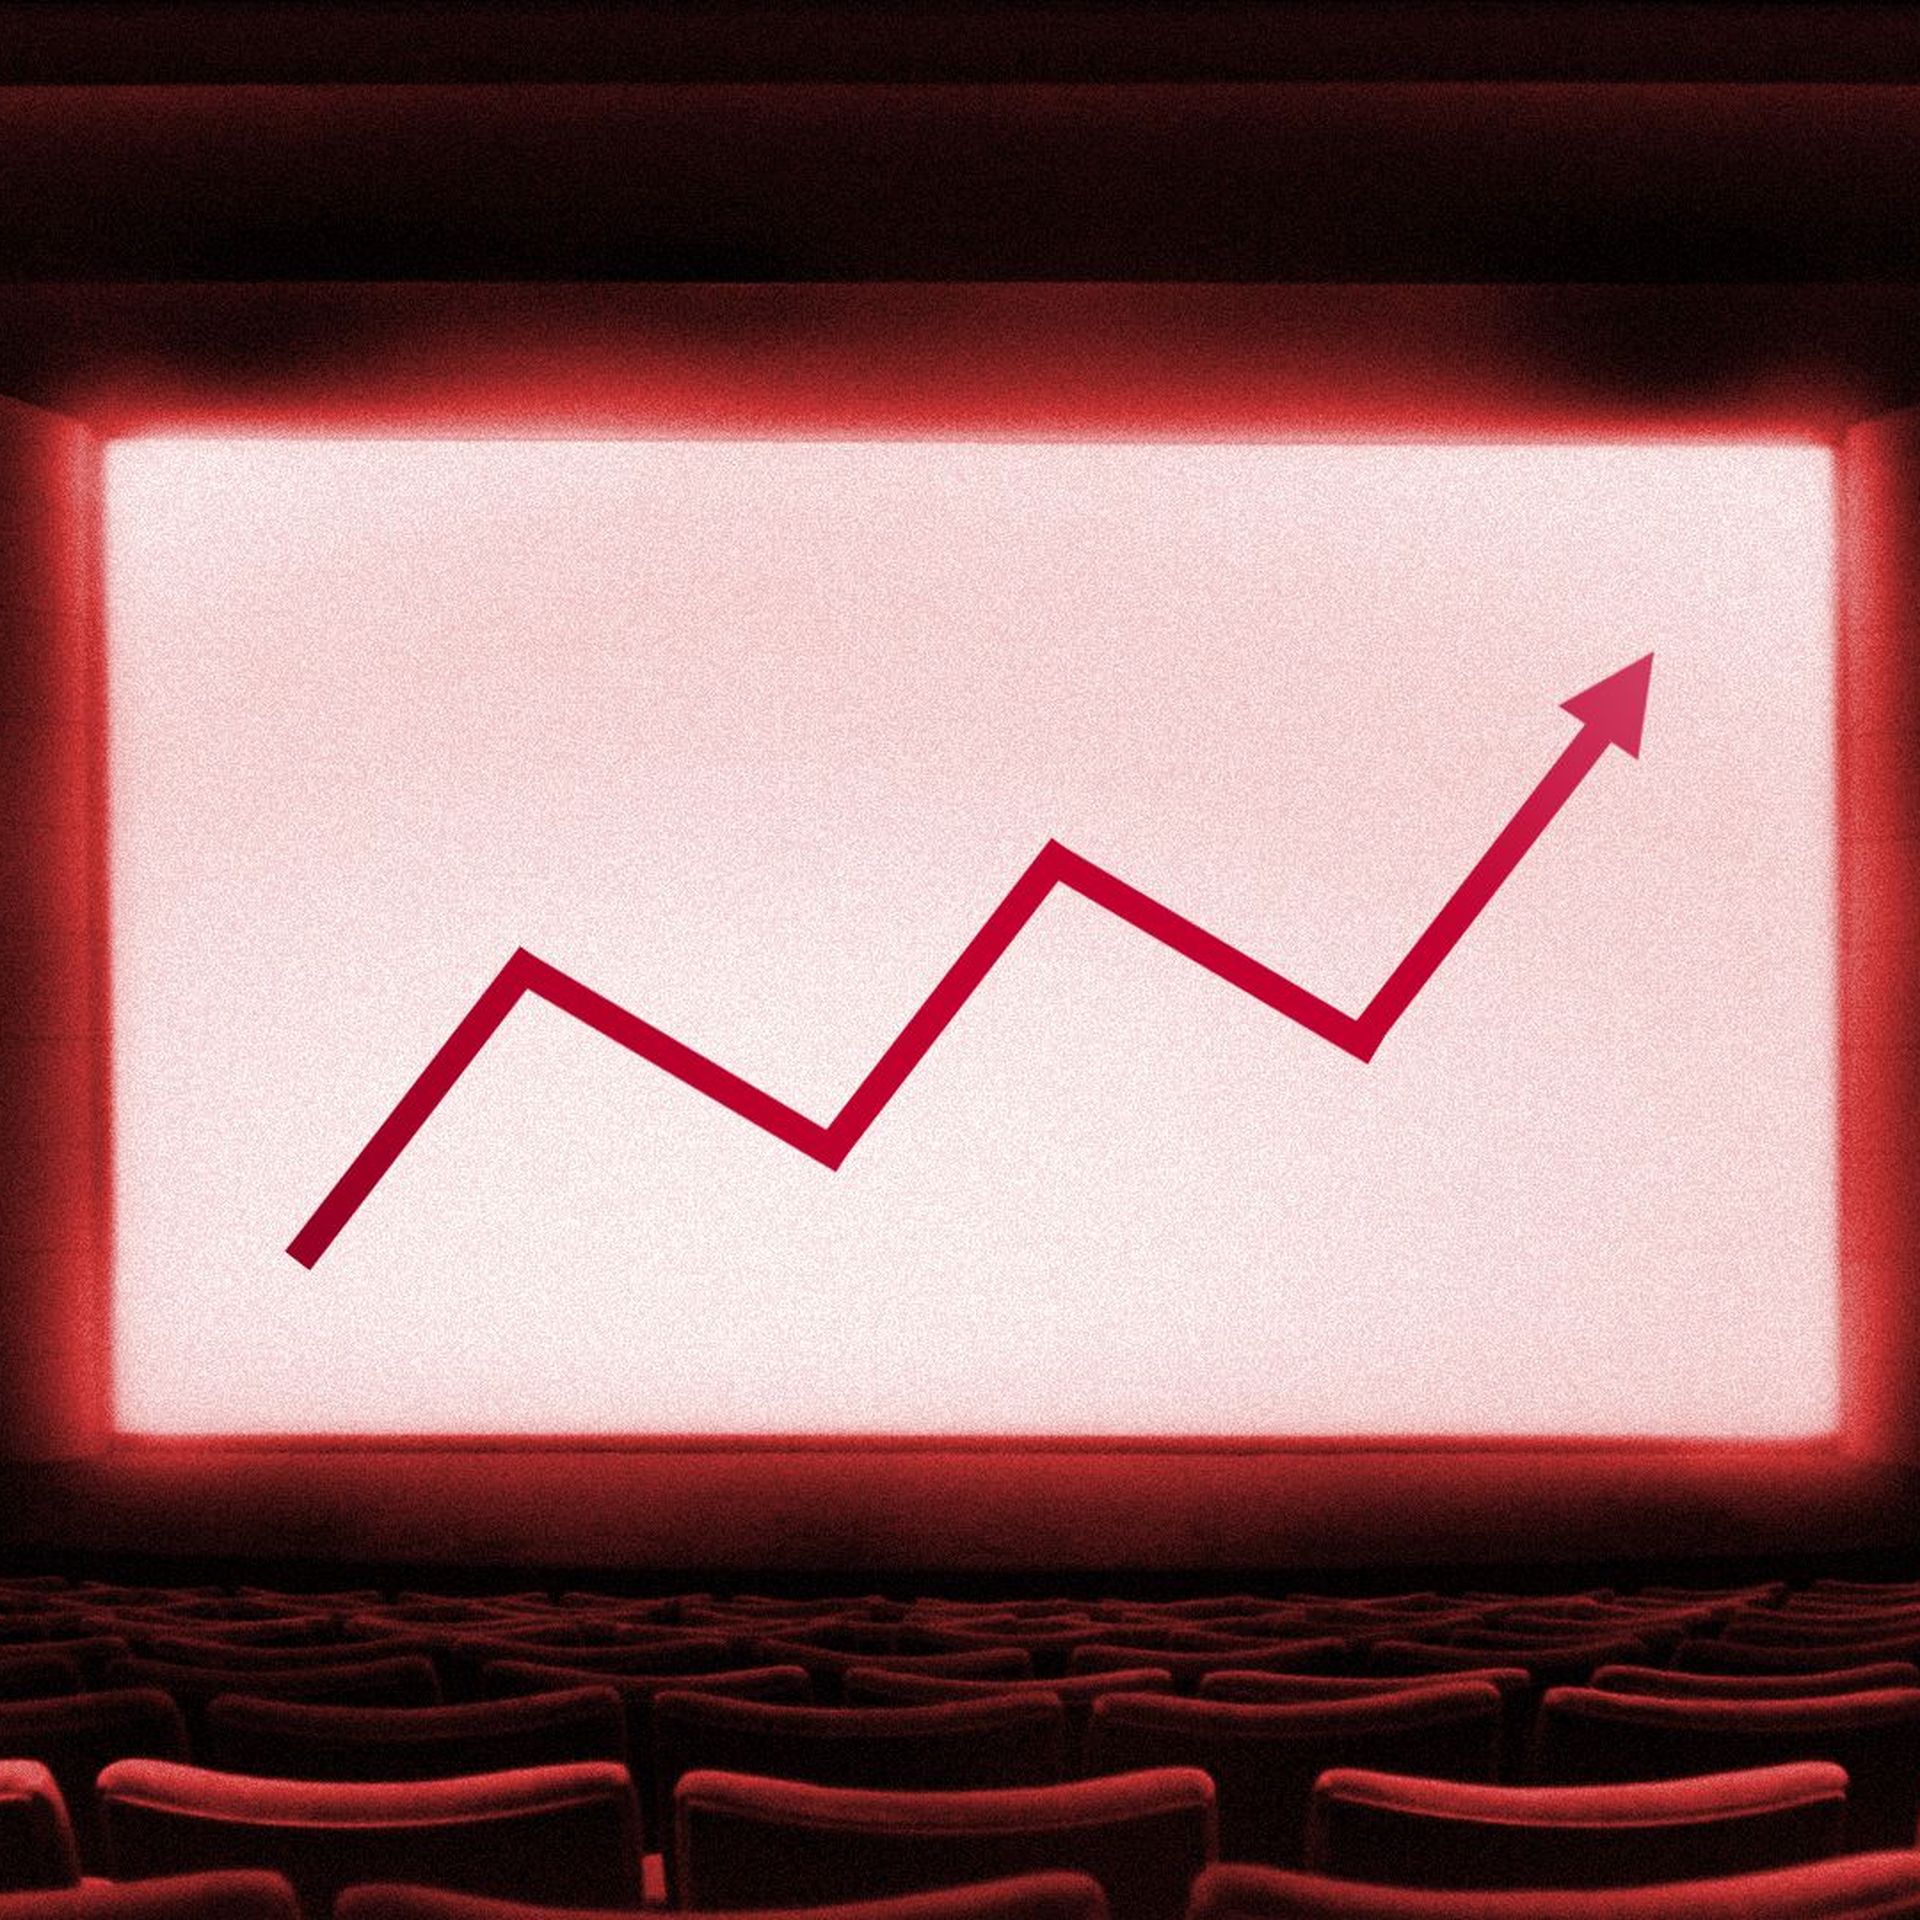 Illustration of a stock trend line on a movie theater screen